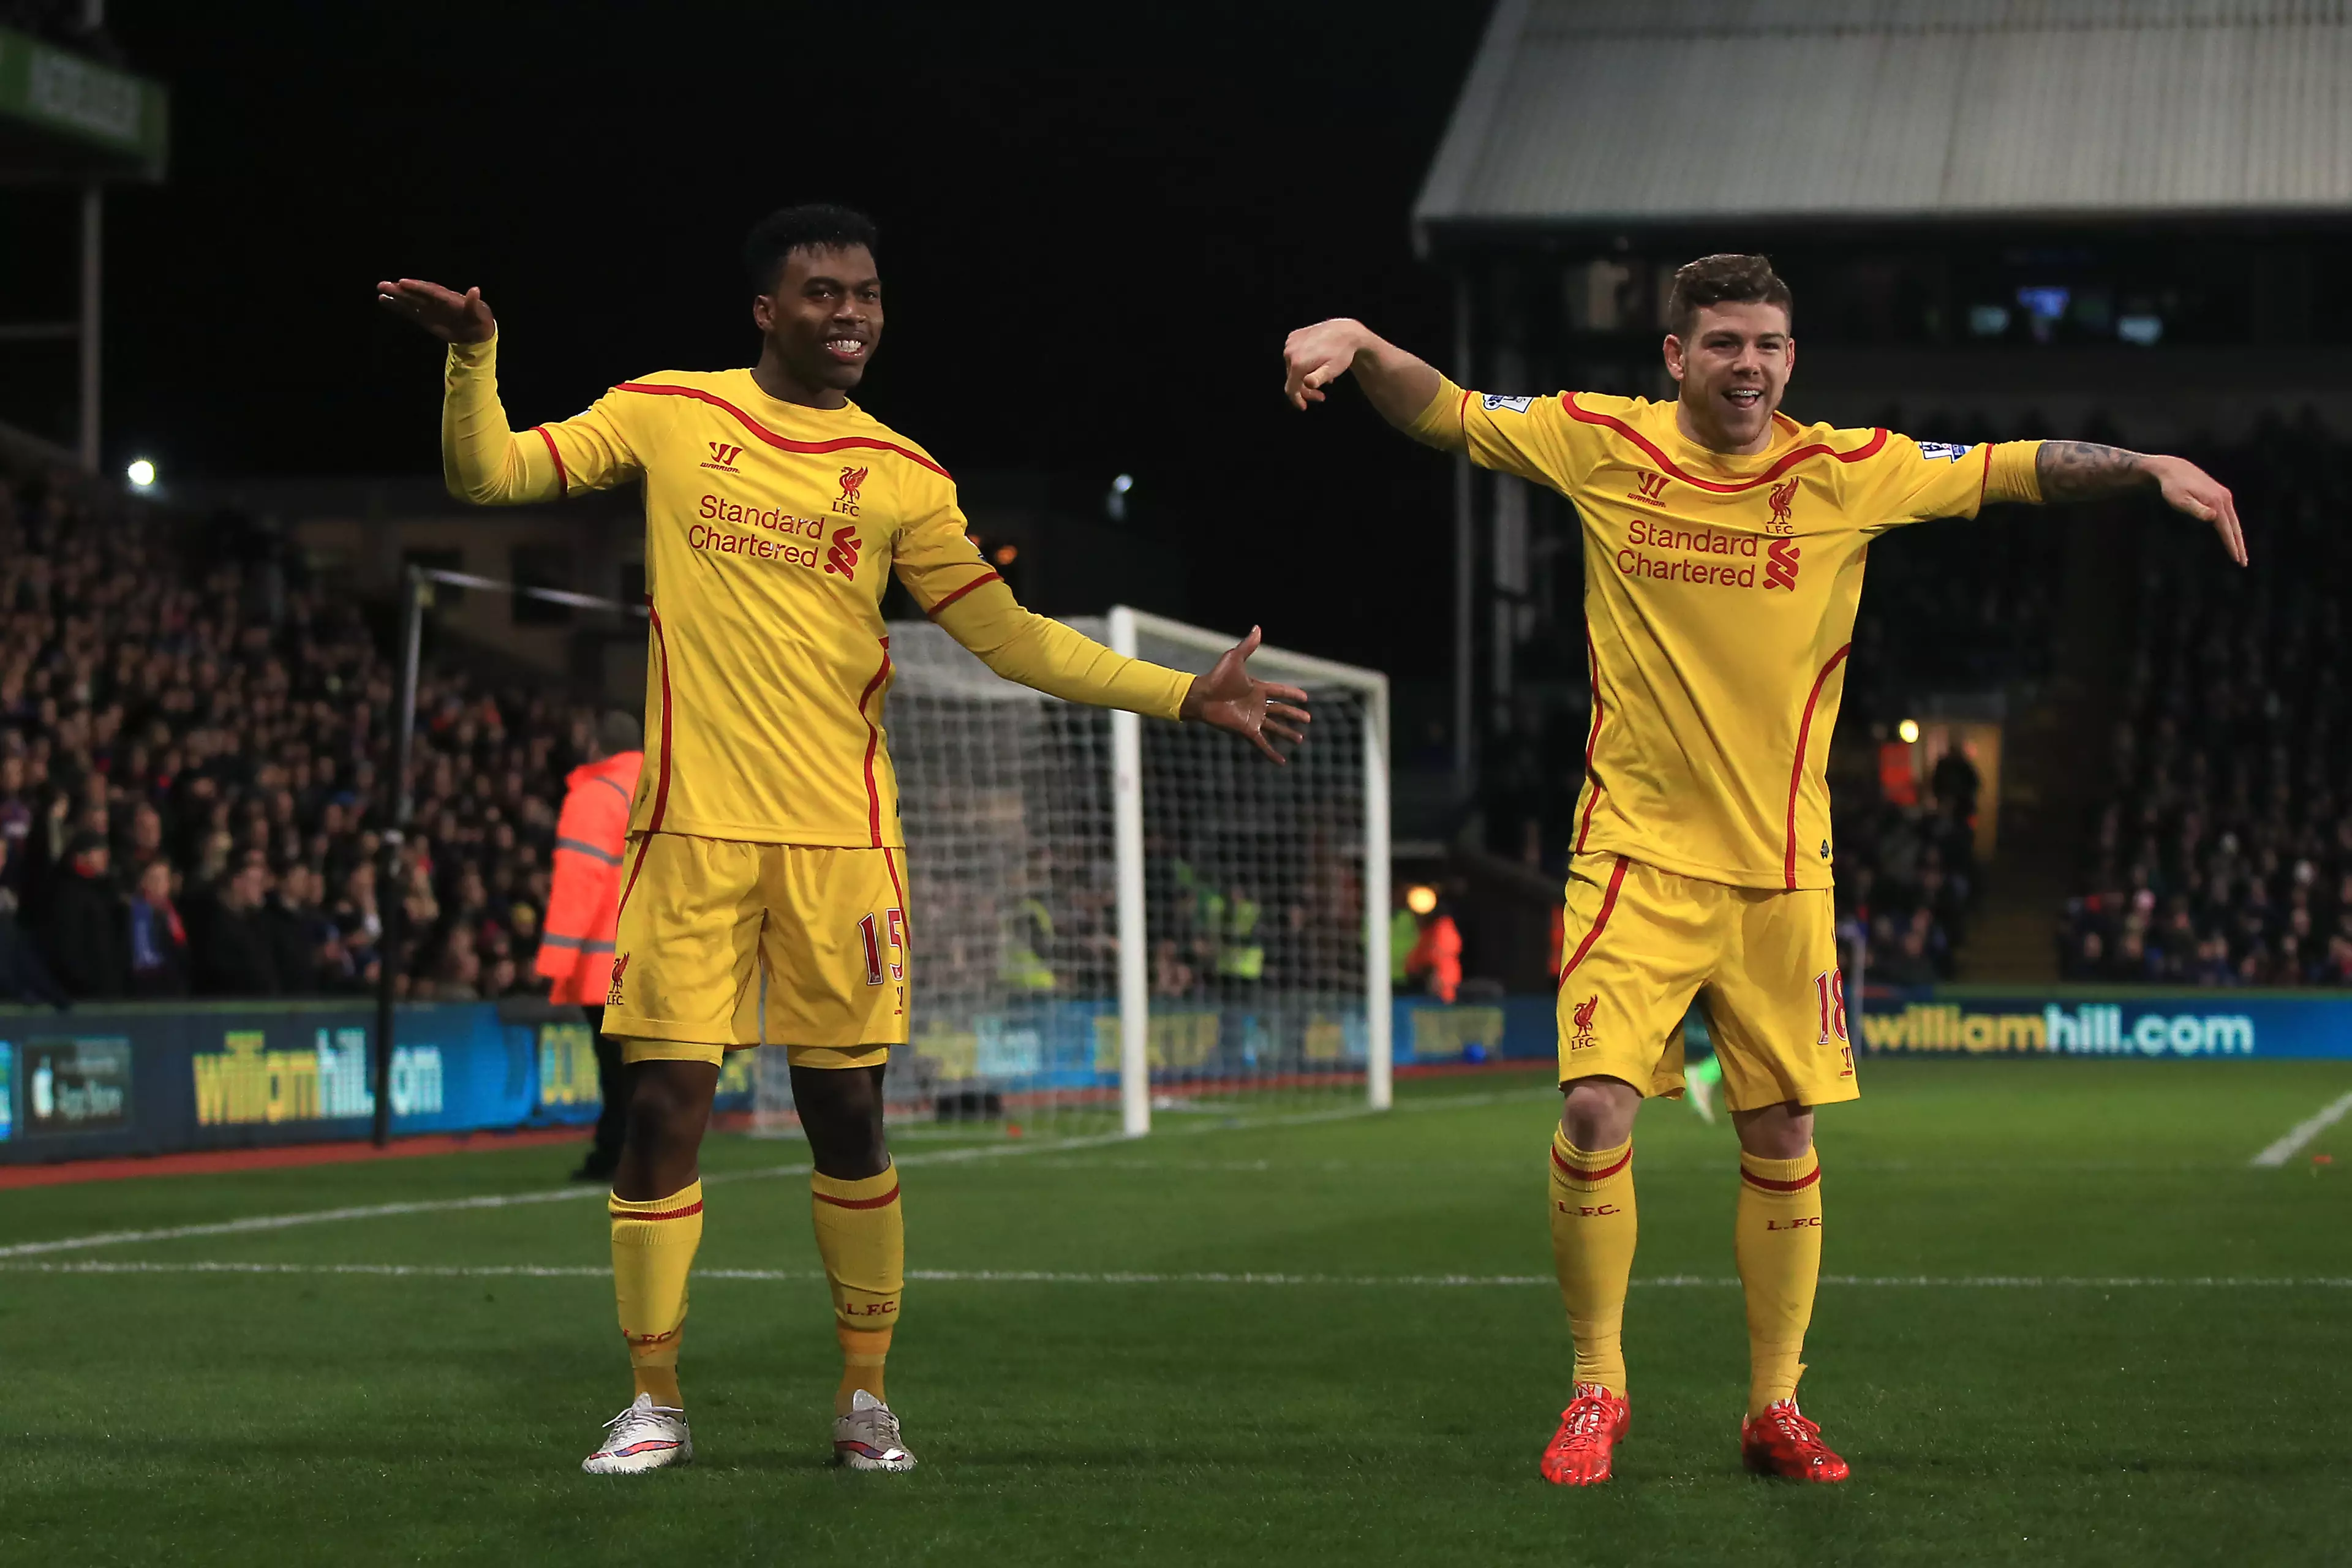 Moreno and Sturridge celebrate a goal together. mage: PA Images